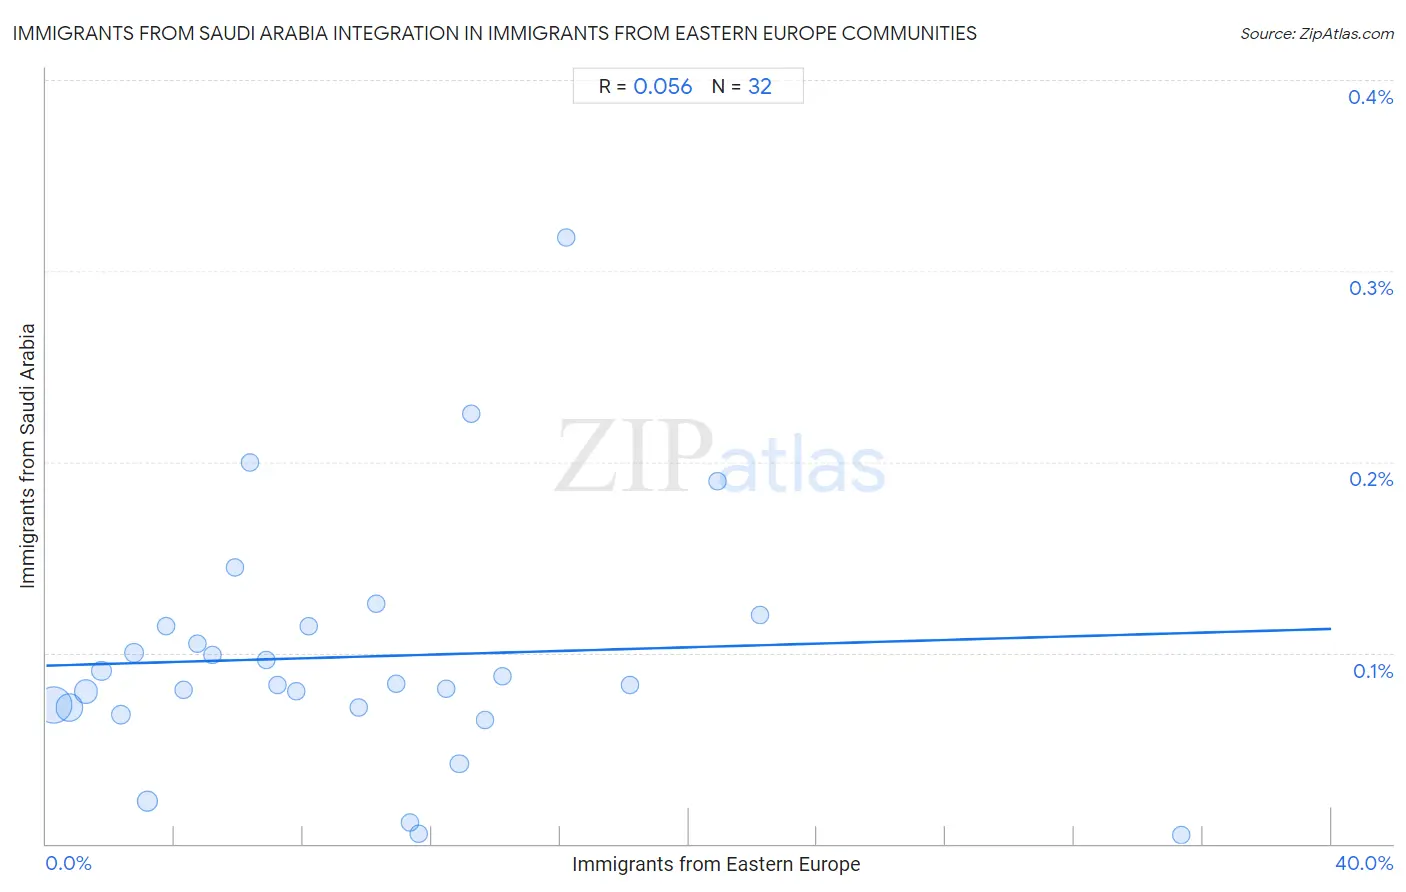 Immigrants from Eastern Europe Integration in Immigrants from Saudi Arabia Communities